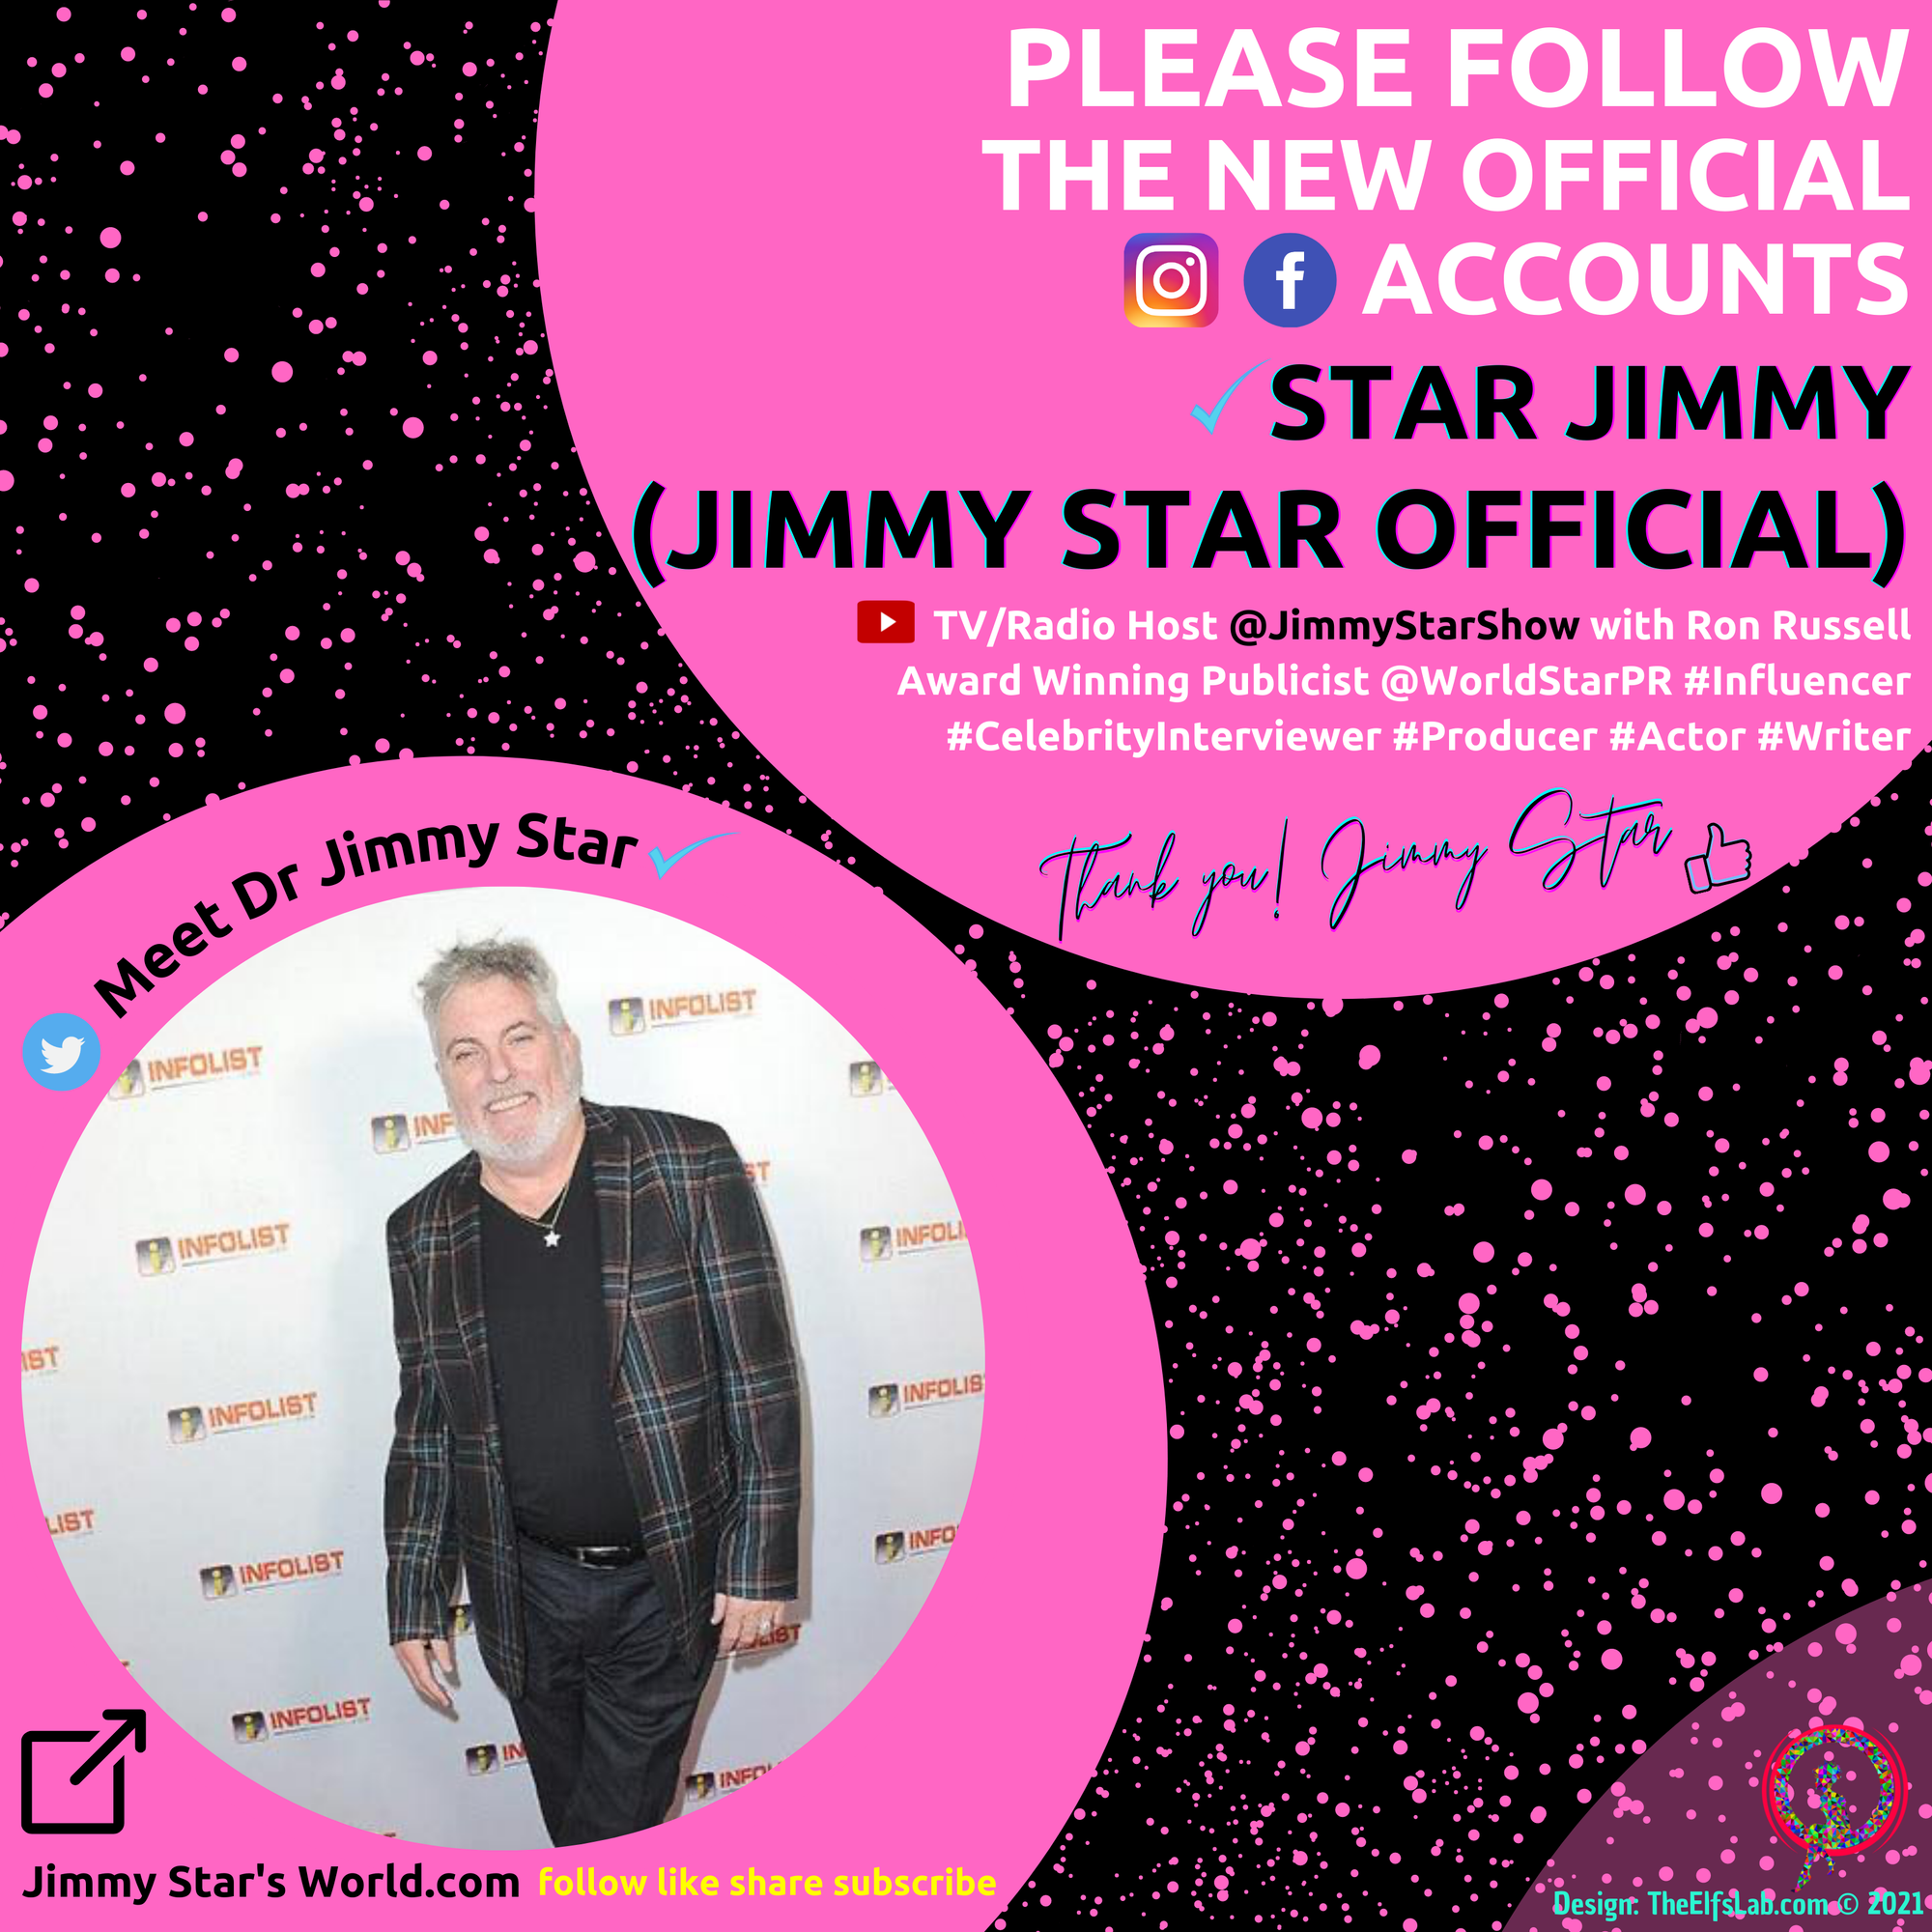 Dr Jimmy Star (Star Jimmy Official)